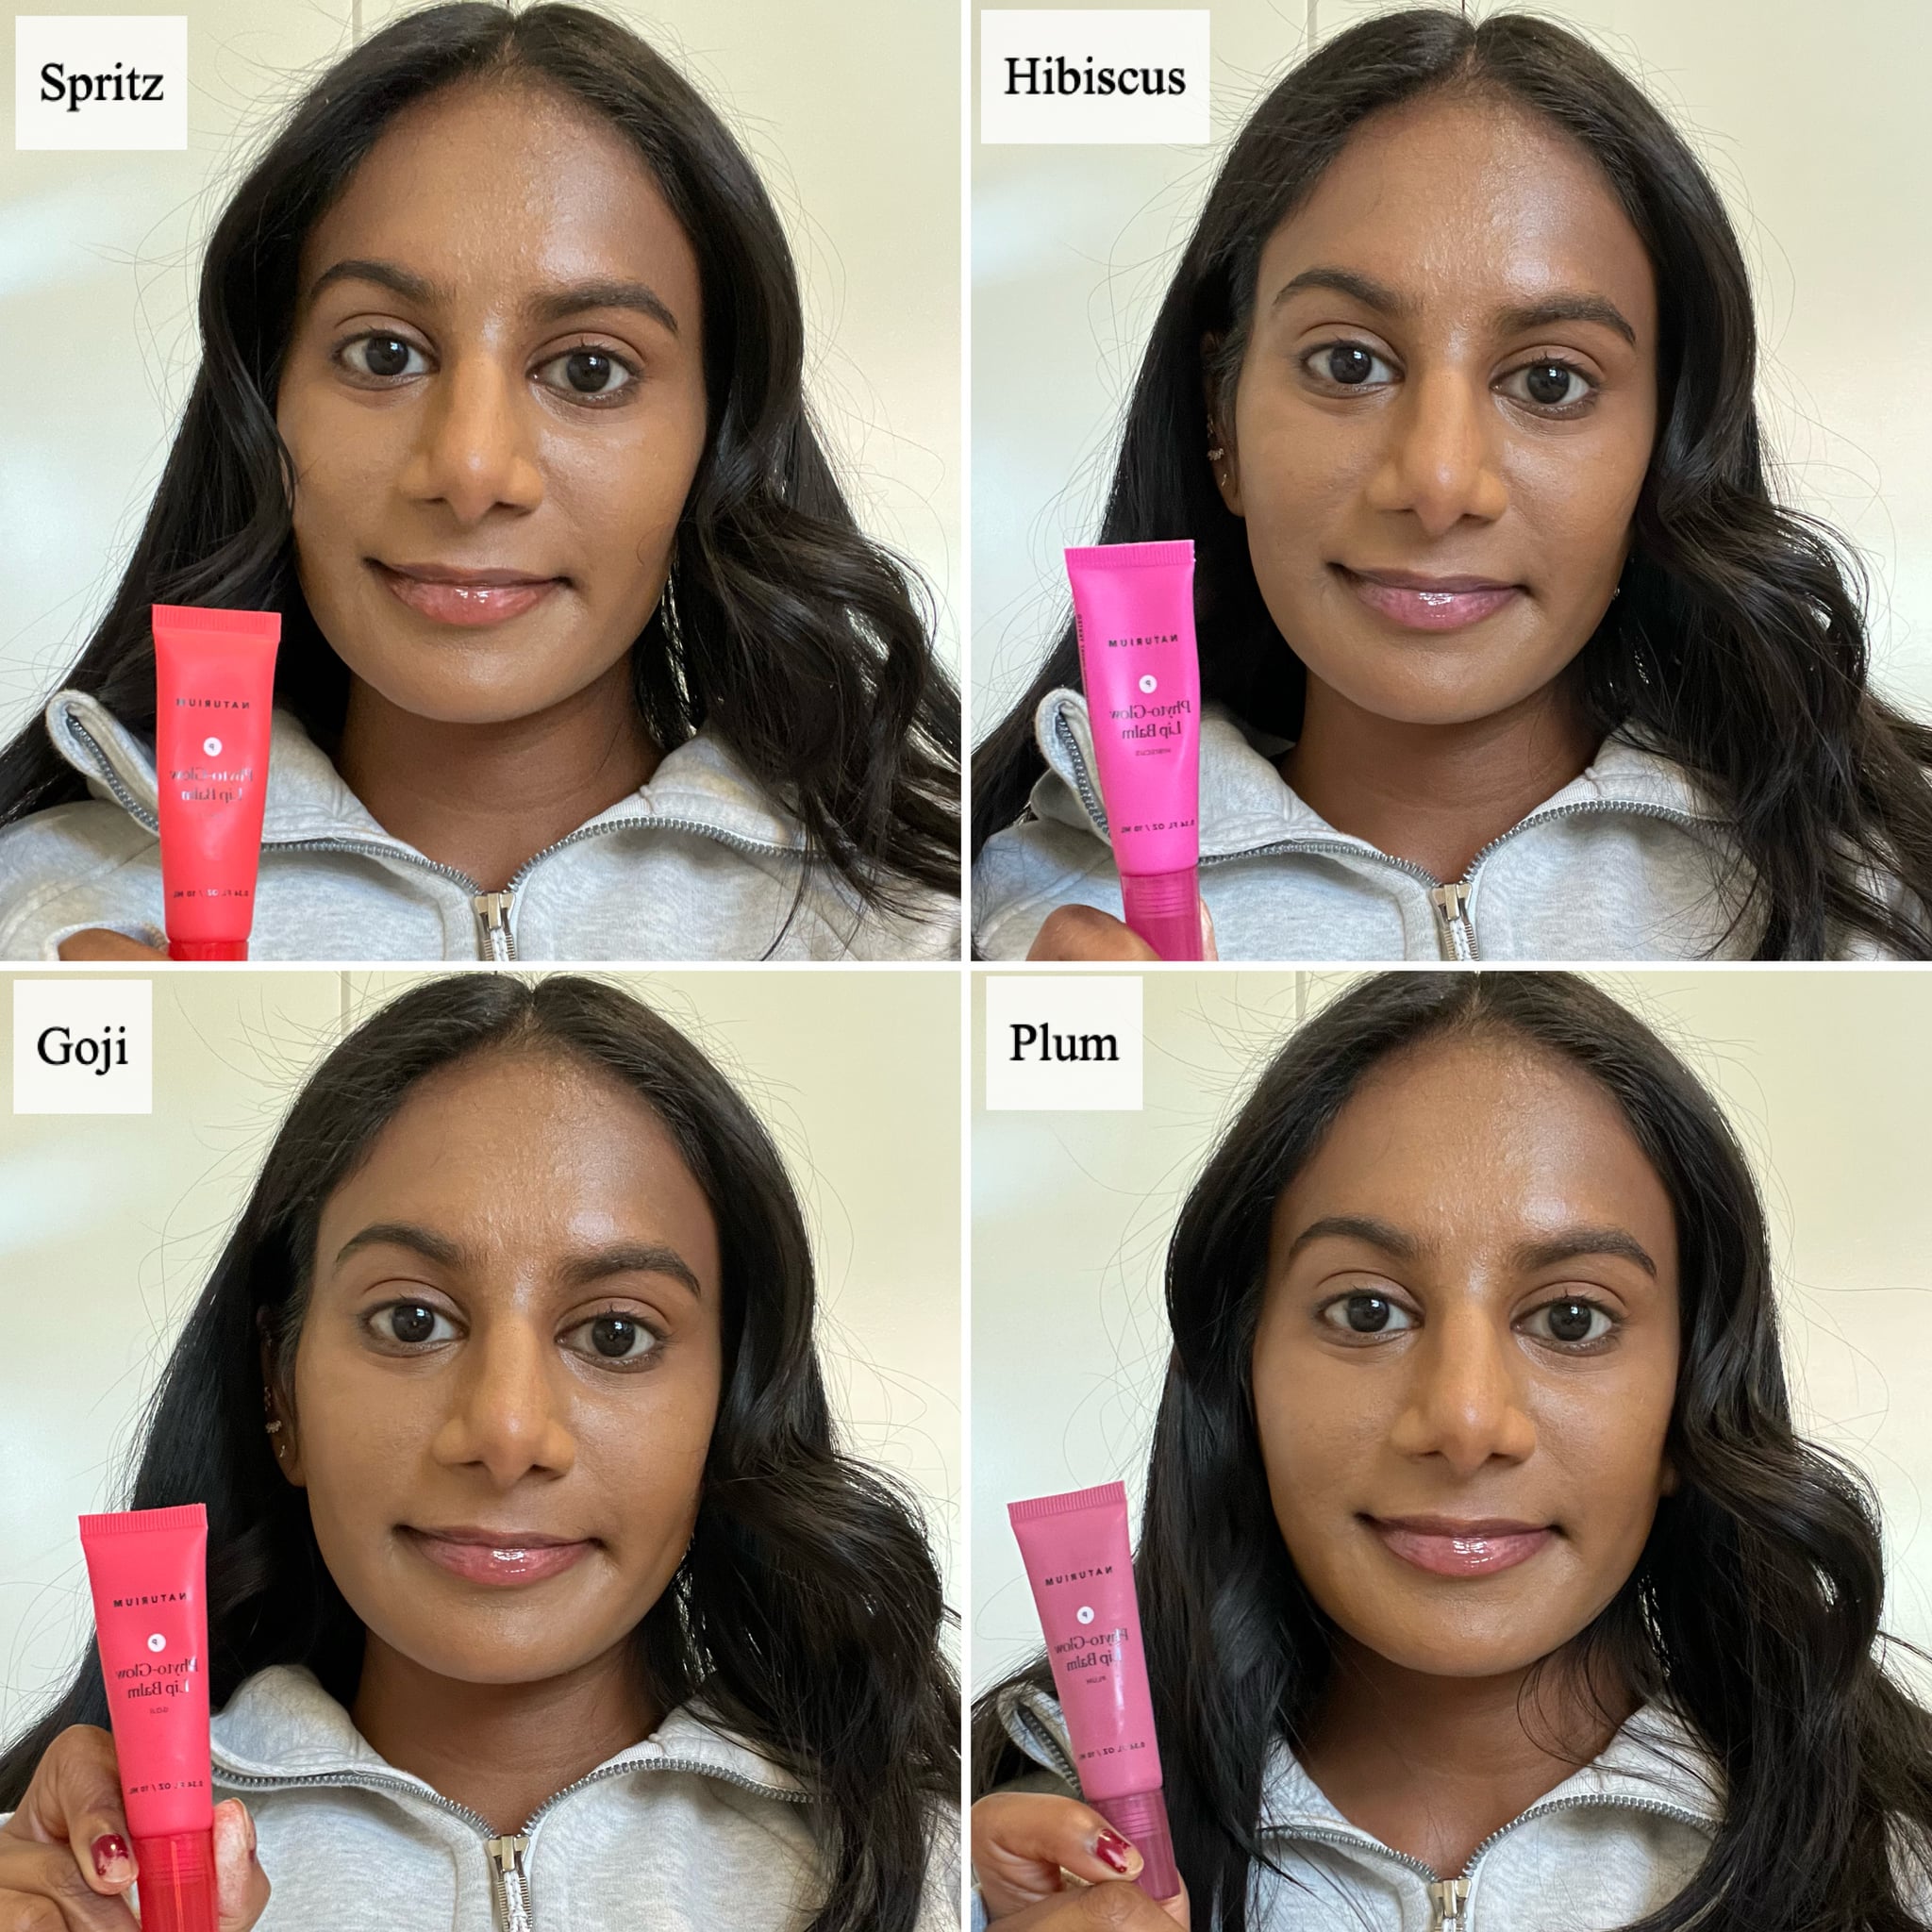 Woman trying out the Naturium Phyto-Glow Lip Balm in spritz, goji, hibiscus, plum.